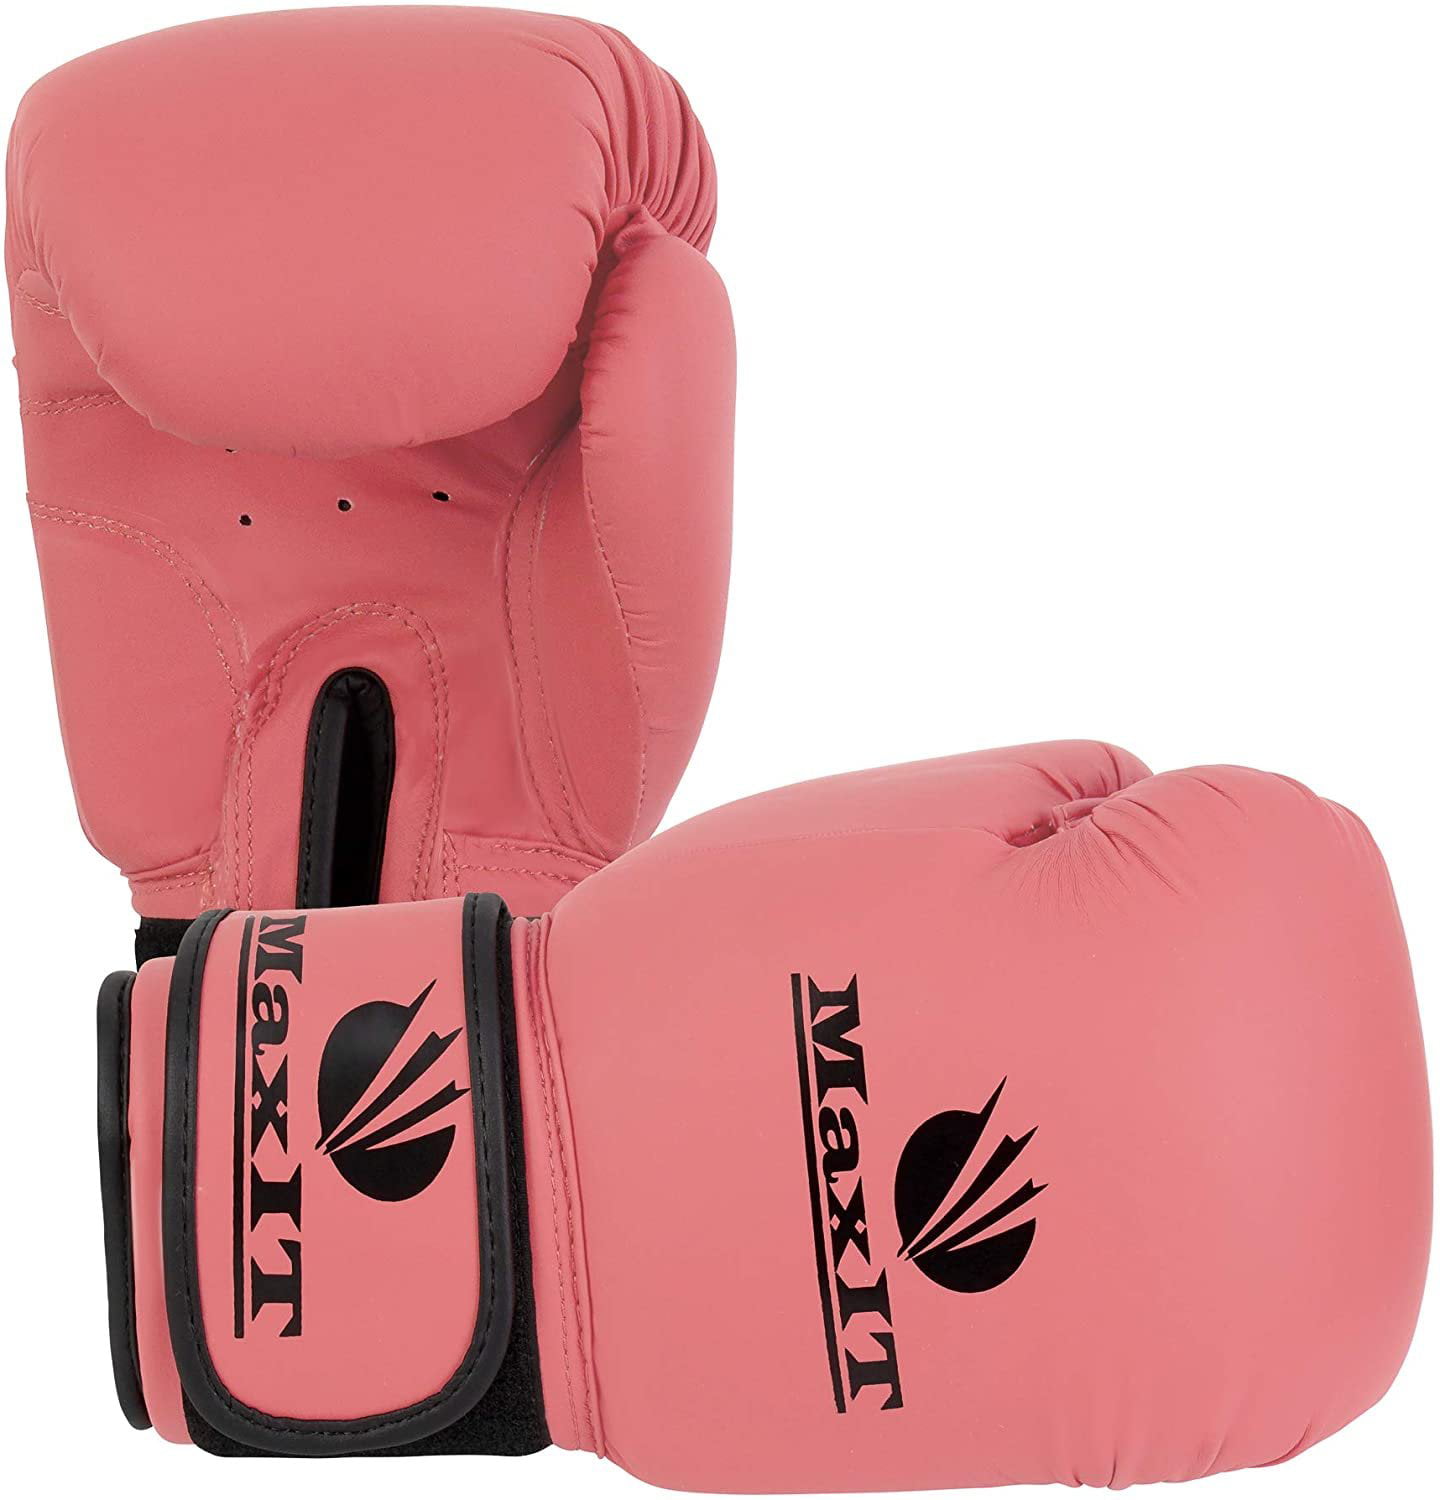 Junior Training Padded for Kids Boys or Girls Junior Hand Glove Set for Sparring Punching Bag MaxIT Pro Style Youth Boxing Gloves Fighting Sports Boxing Kickboxing